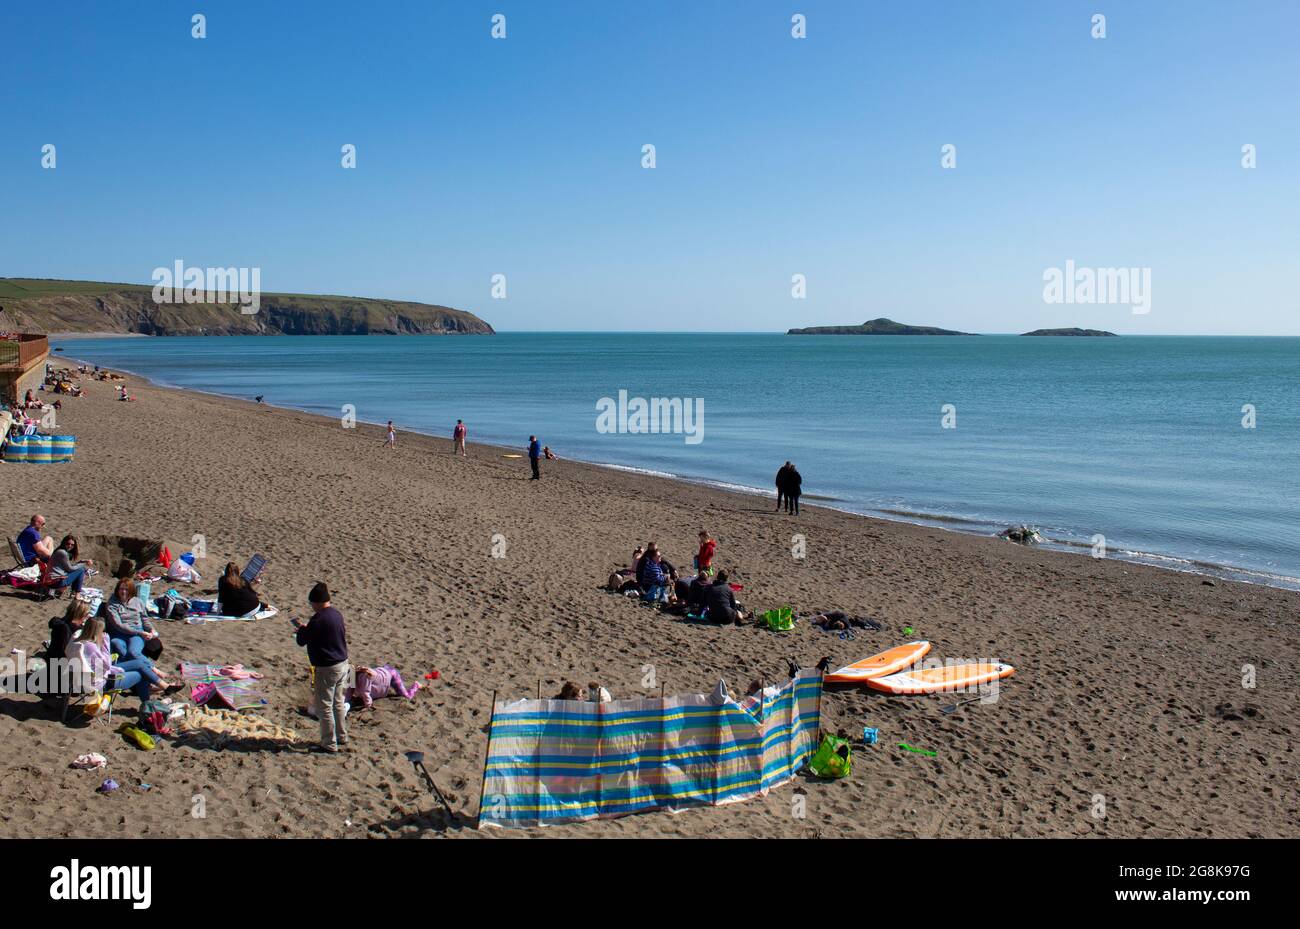 Aberdaron - Wales - April 3 2021 : Traditional seaside scene Holiday makers relax on a fine sandy beach under a clear blue sky Landscape aspect with c Stock Photo